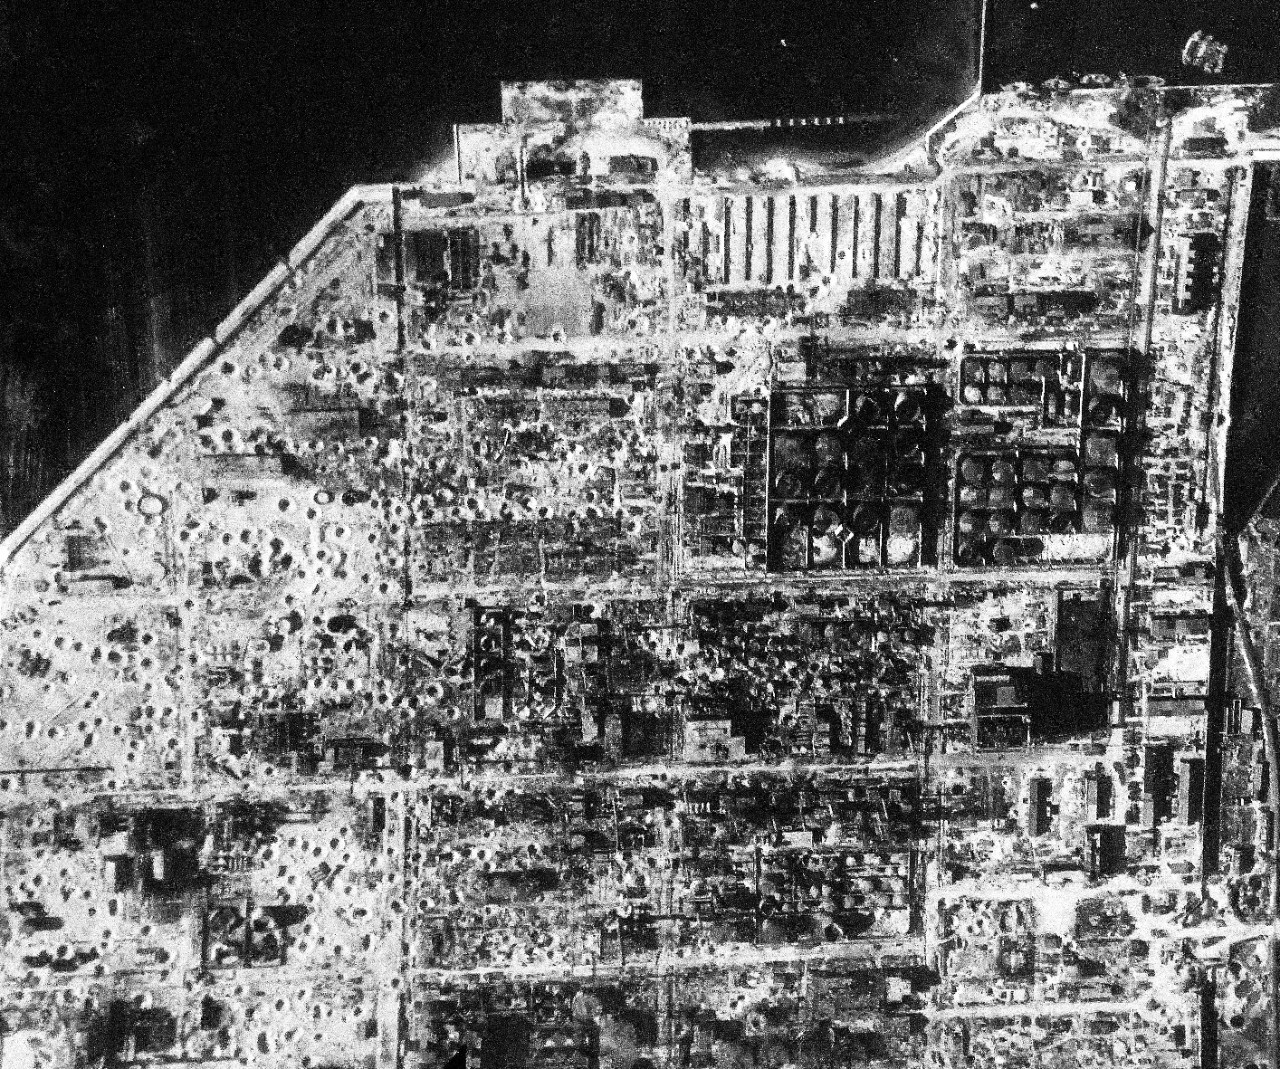 80-G-490150:  Raids on Japanese Home Islands, July  14, 1945.    Bomb craters pock-mark area in and around oil storage tanks and buildings near Iwakuni airfield on Honshu, Japan, after an attack by carrier based planes of the Third Fleet.  U.S. Navy Photograph, now in the collections of the National Archives. (2015/12/08). 